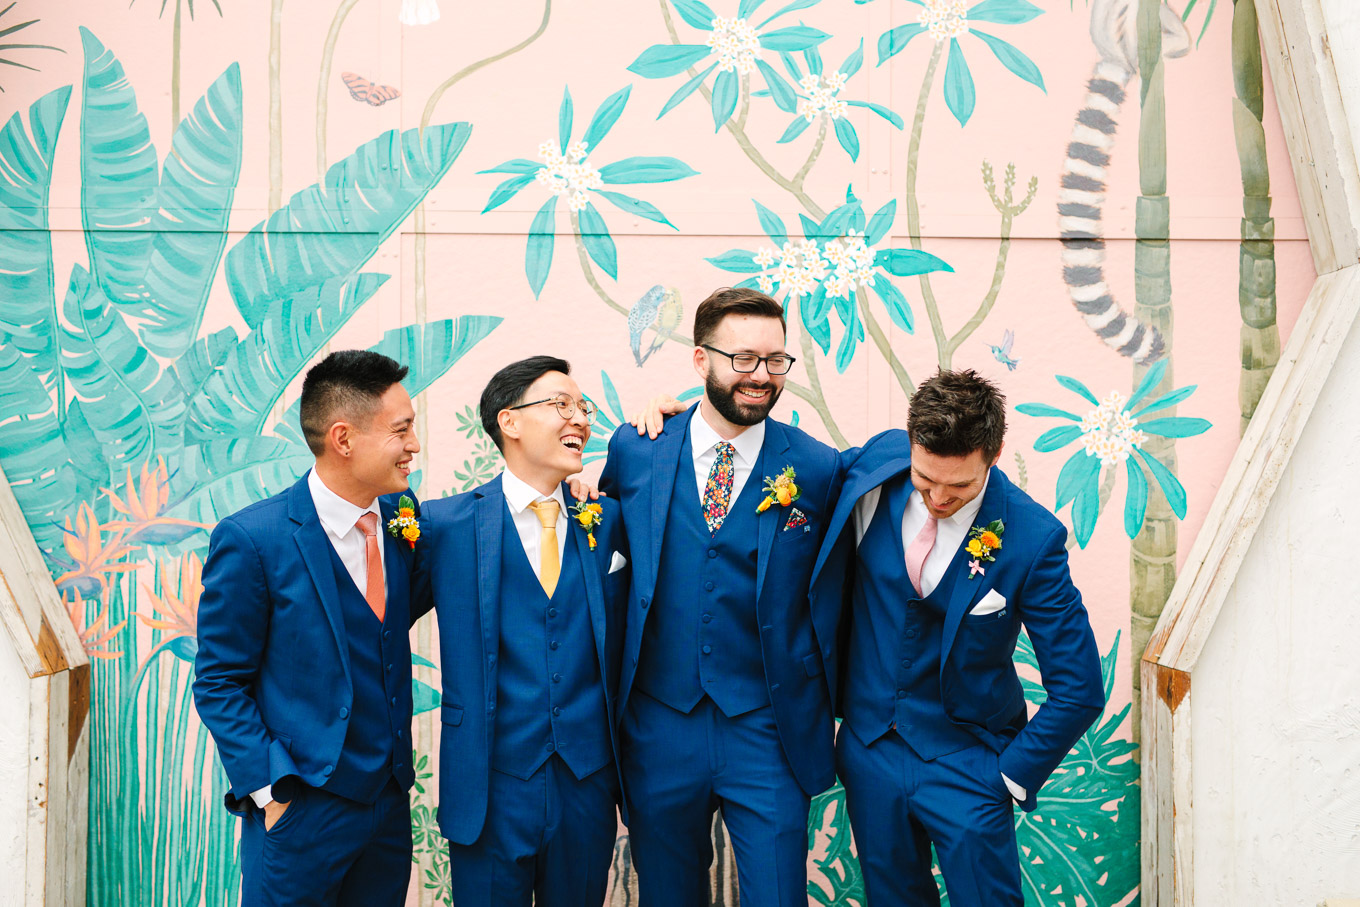 Groomsmen in bright blue suits | Colorful Downtown Los Angeles Valentine Wedding | Los Angeles wedding photographer | #losangeleswedding #colorfulwedding #DTLA #valentinedtla   Source: Mary Costa Photography | Los Angeles